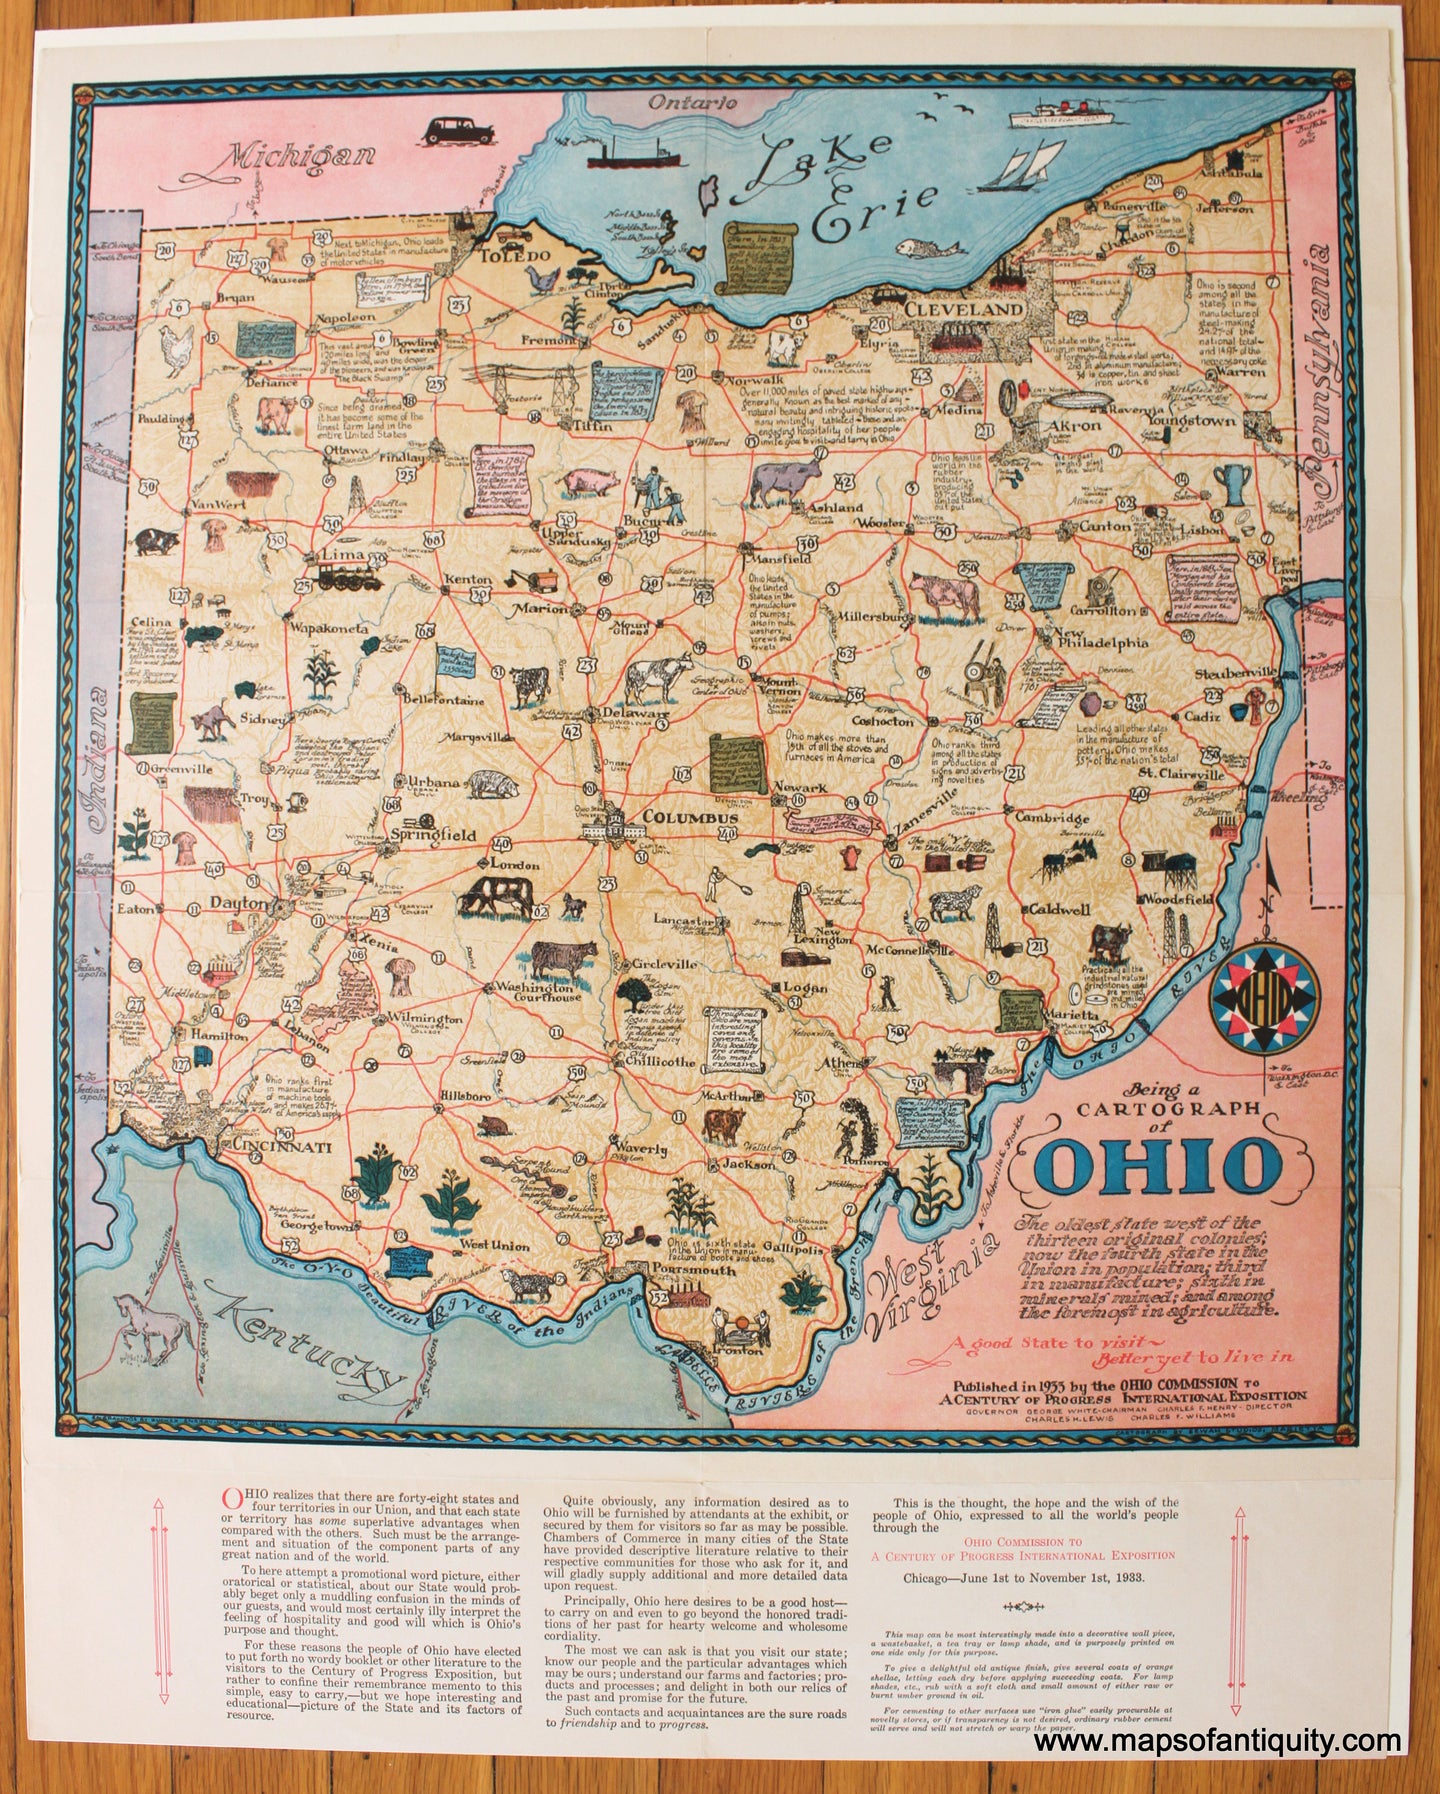 Antique-Printed-Color-Pictorial-Map-Being-a-Cartograph-of-Ohio-1933-Sewah-Studios-Midwest-Ohio-1800s-19th-century-Maps-of-Antiquity